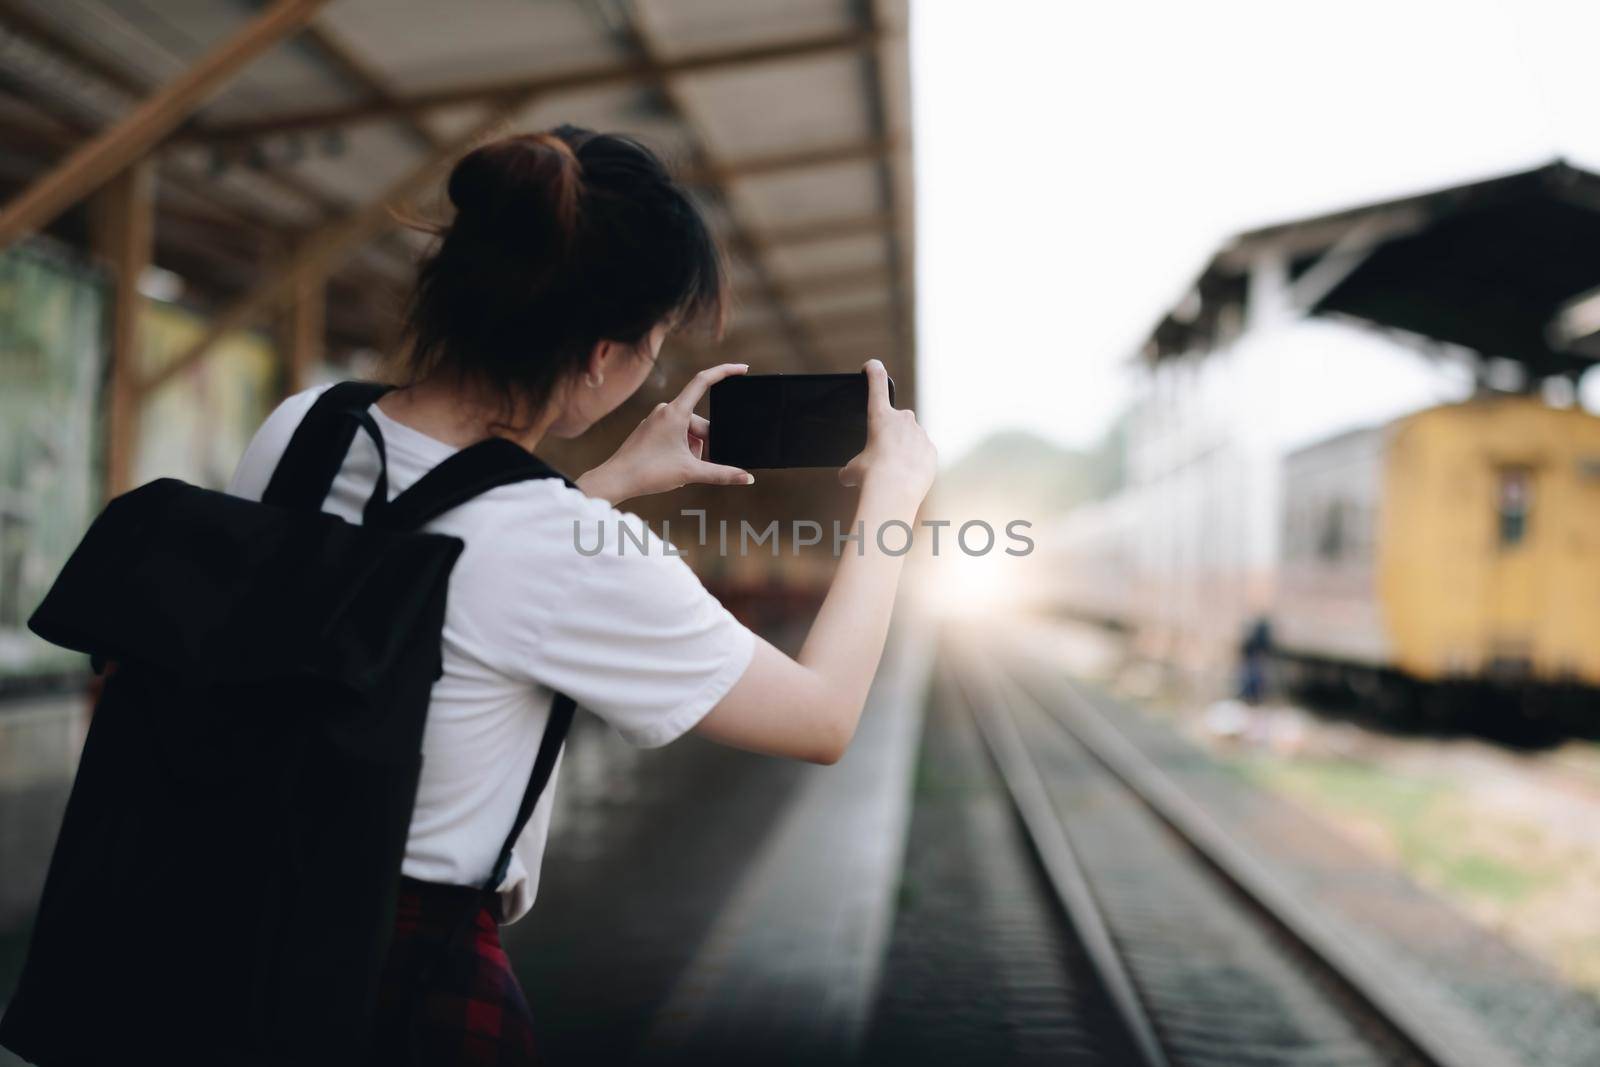 Tourist woman aling selfie with a smartphone while at the train station. Enjoying travel concept. Girl using smartphone while at the railway station platform..